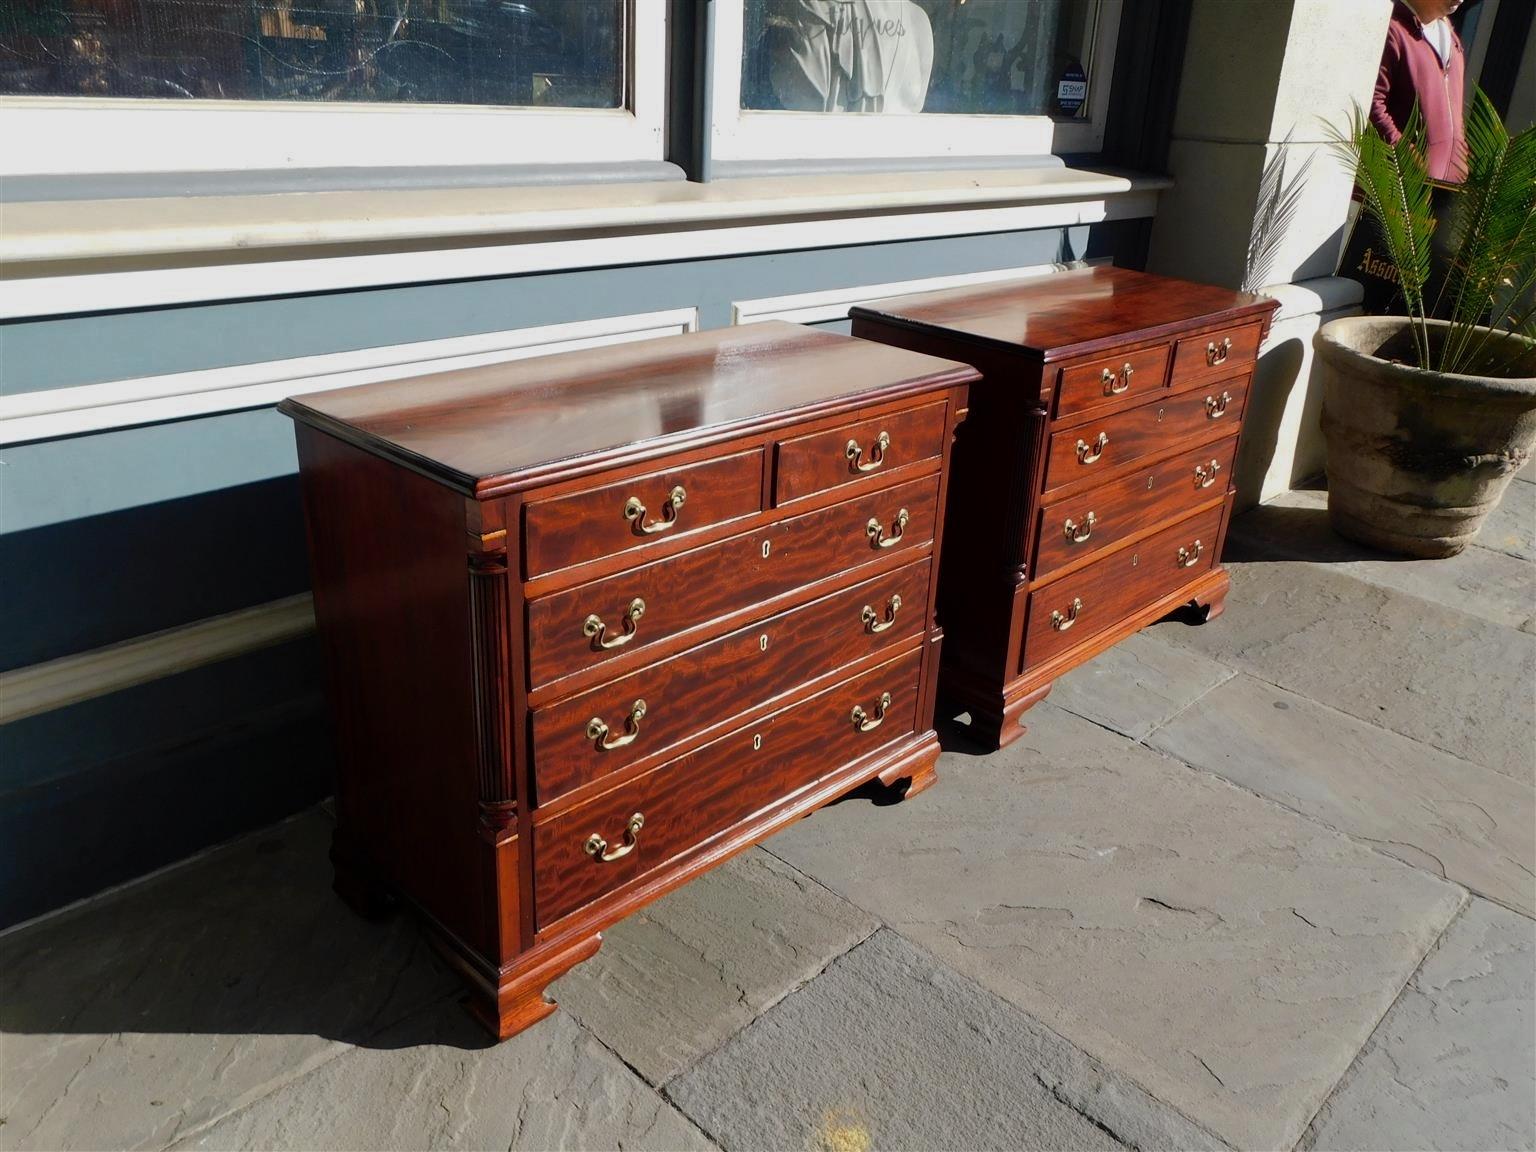 Pair of English Chippendale mahogany chest of drawers with carved molded edge tops, flanking reeded quarter columns, five graduated drawers with the original brasses, and resting on the original ogee bracket feet. Late 18th century.